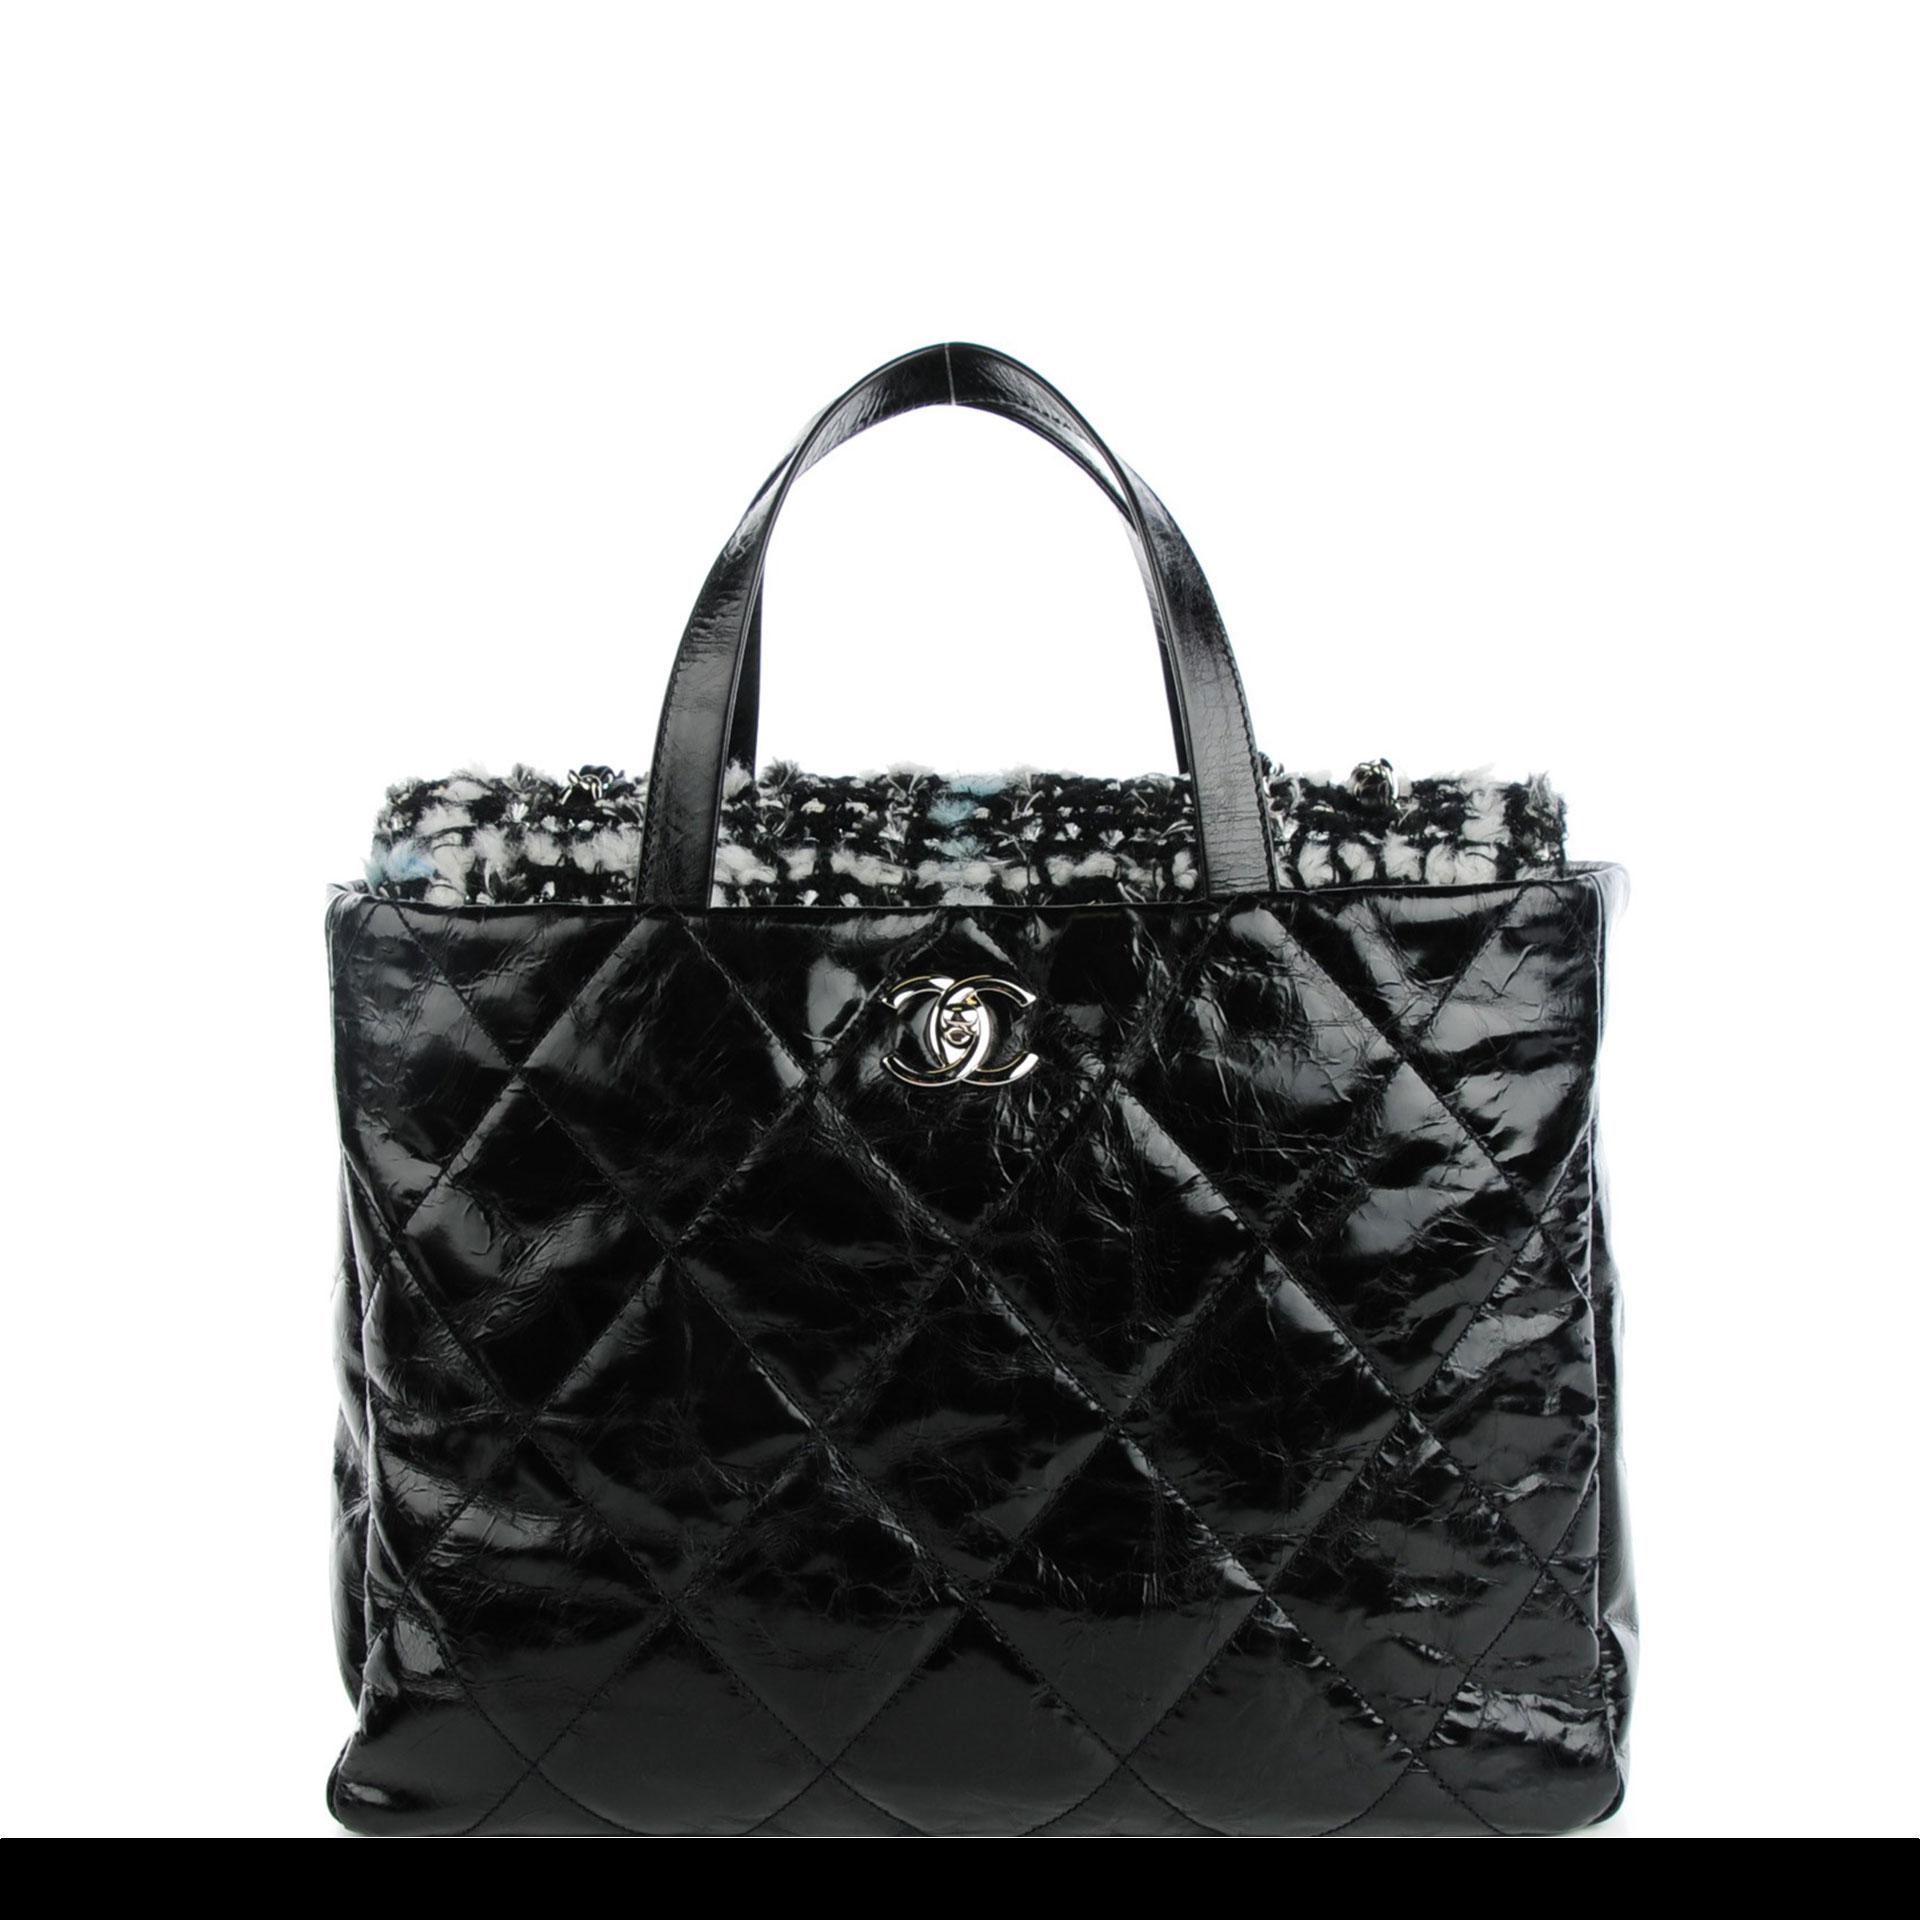 Chanel Limited Edition Soho Glazed Calfskin Quilted Tweed Flight Travel Tote Bag In Good Condition For Sale In Miami, FL